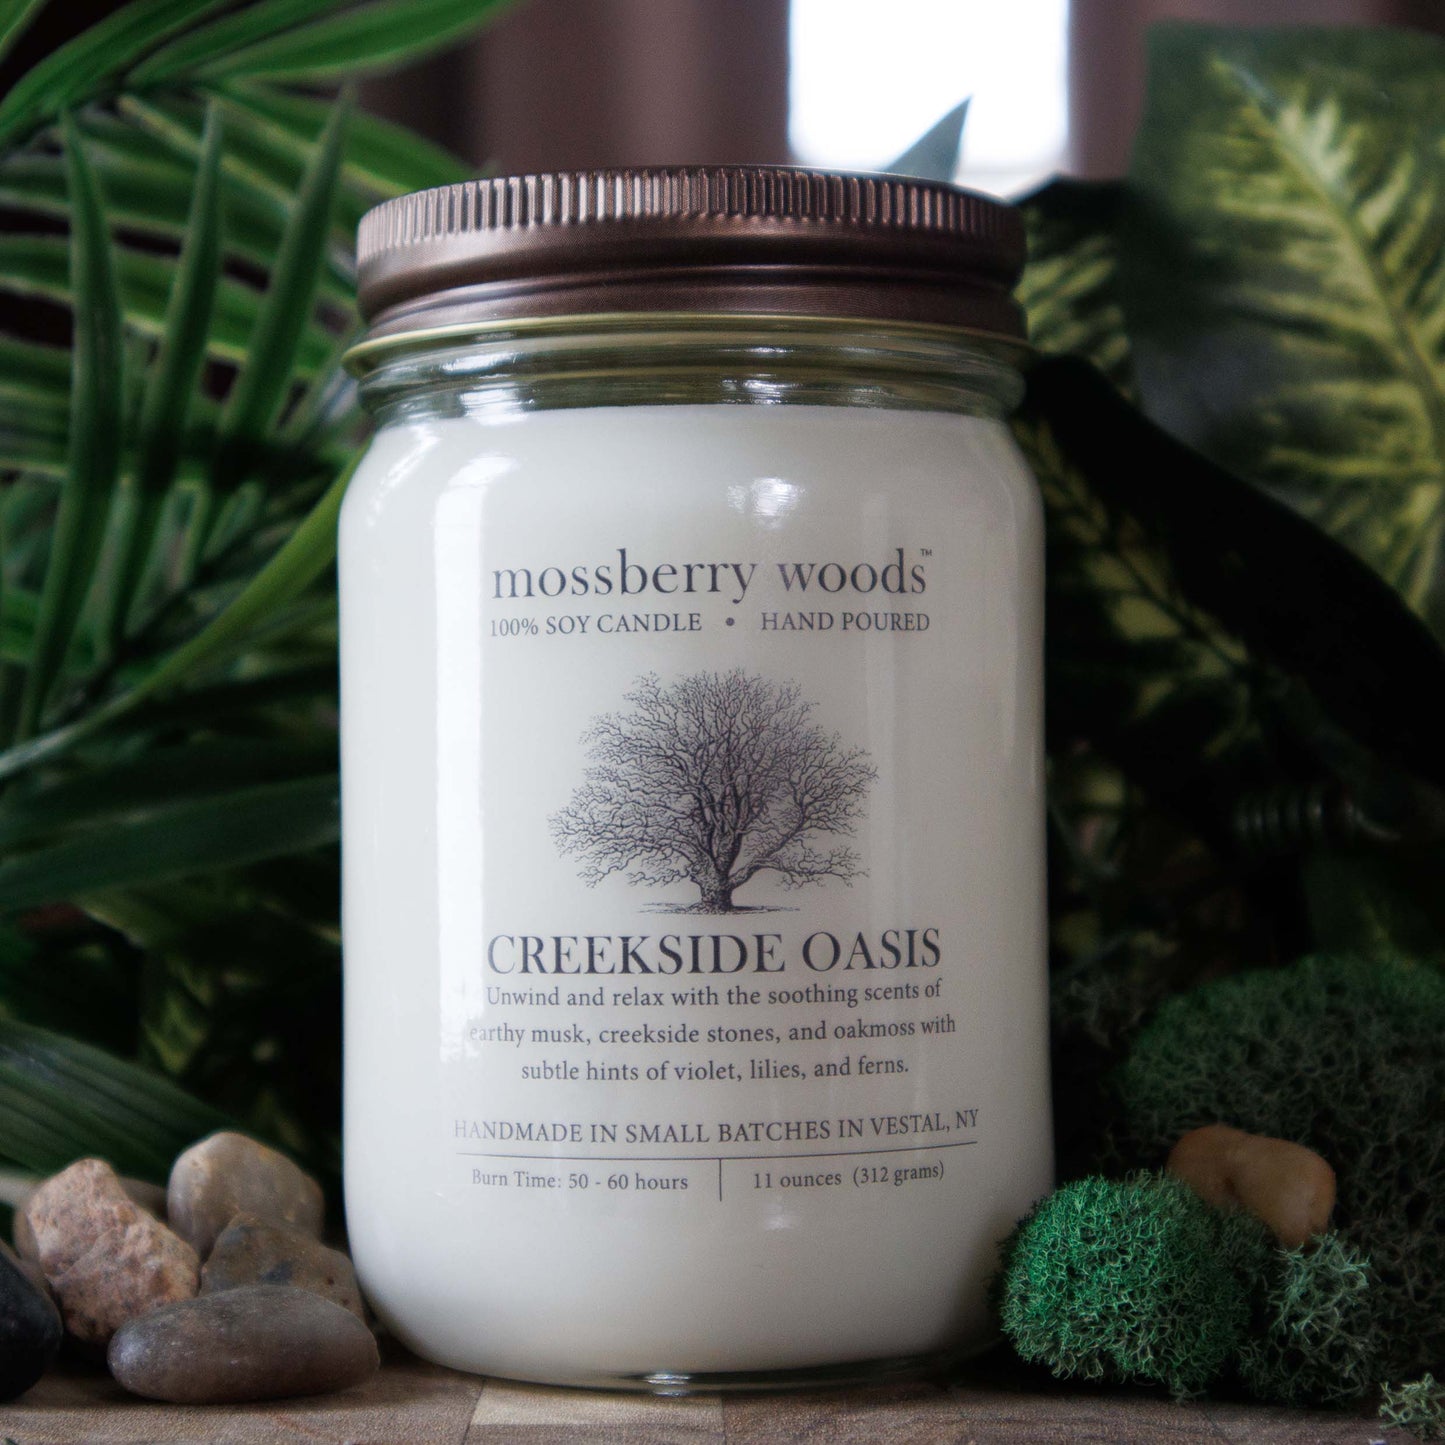 Creekside Oasis scented soy candle with ferns, moss, and stones.